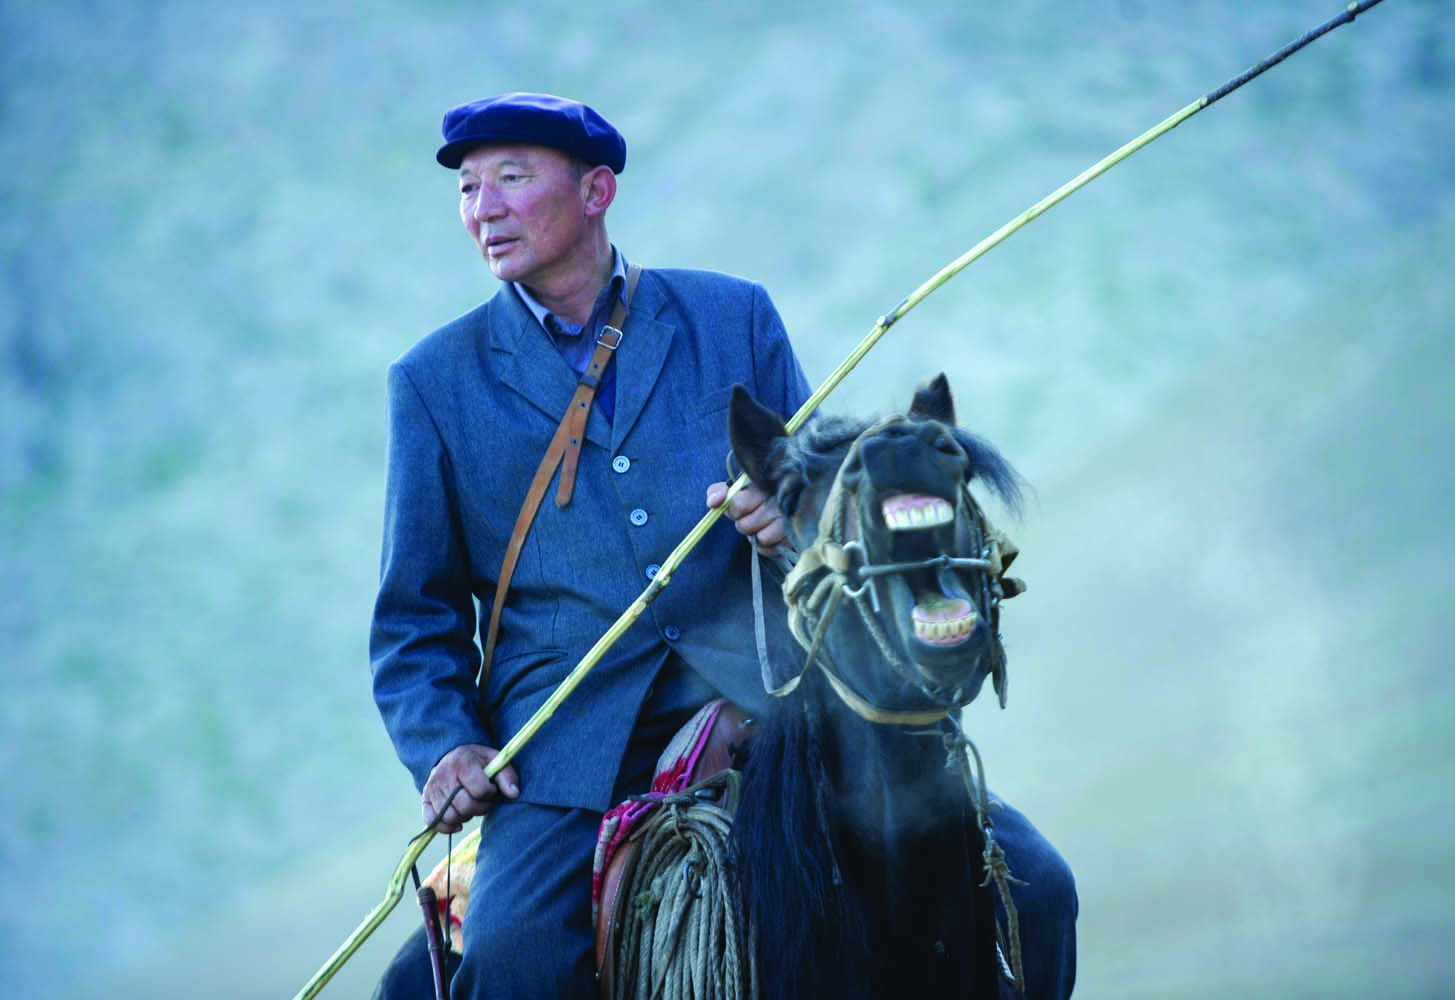 There are more than fifty recognized ethnic minorities in China; the Kazakhs are just one.